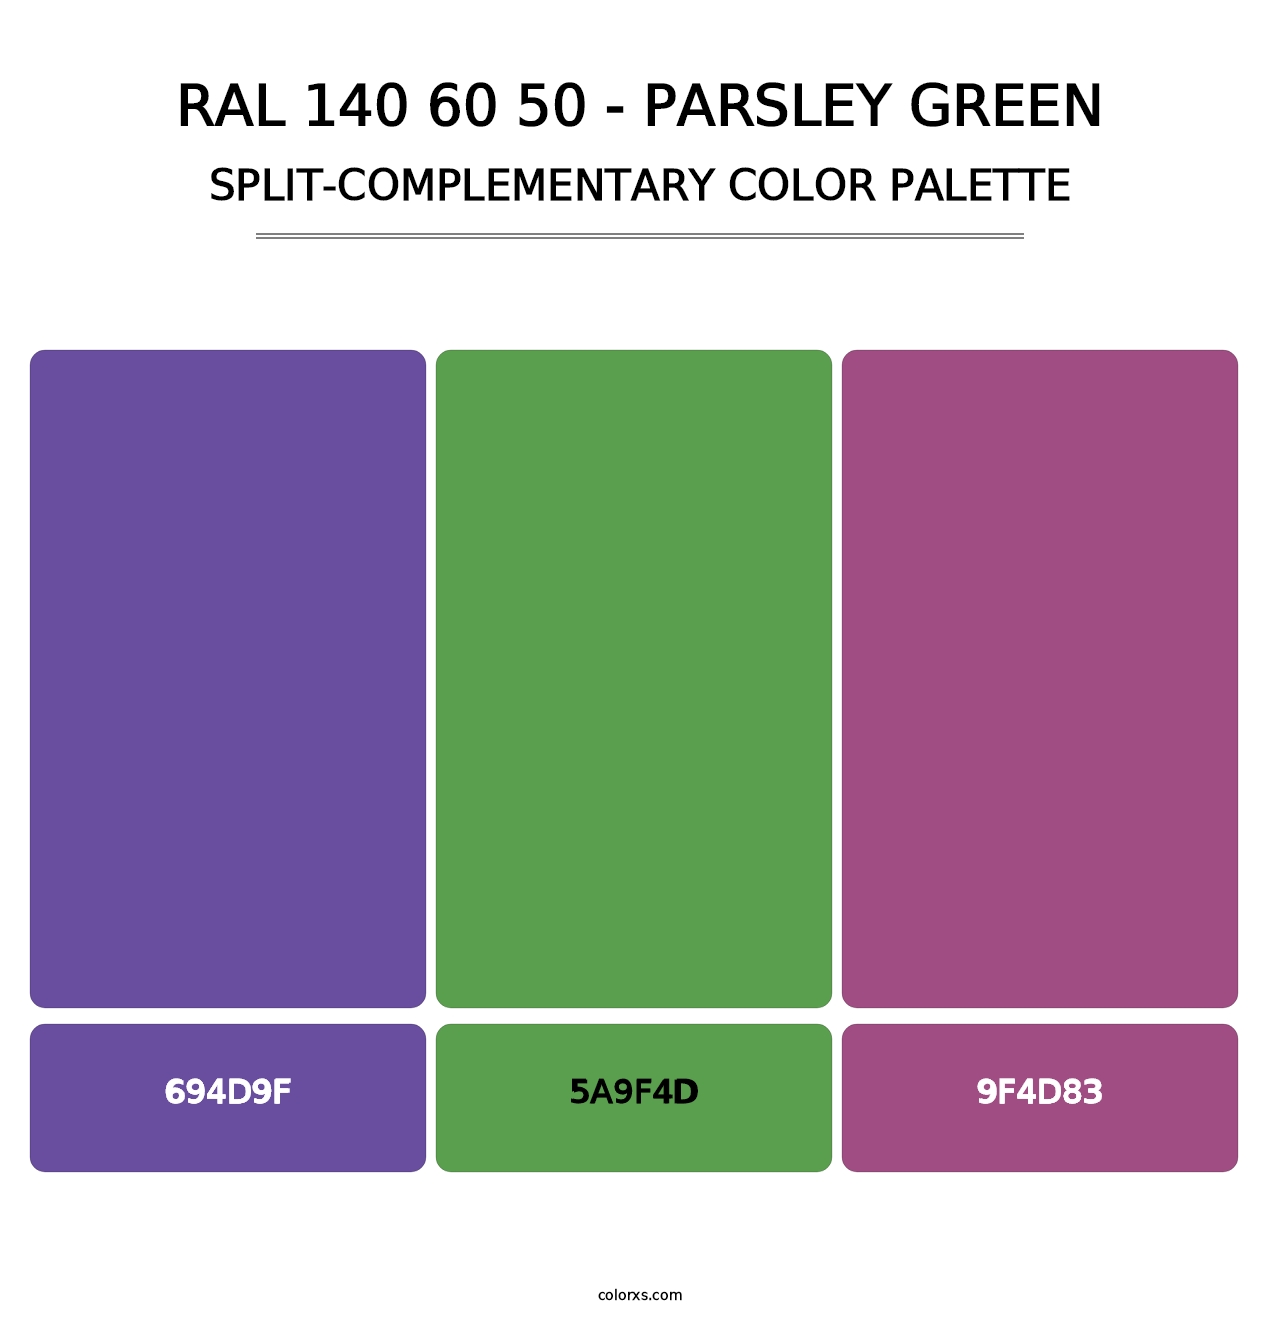 RAL 140 60 50 - Parsley Green - Split-Complementary Color Palette